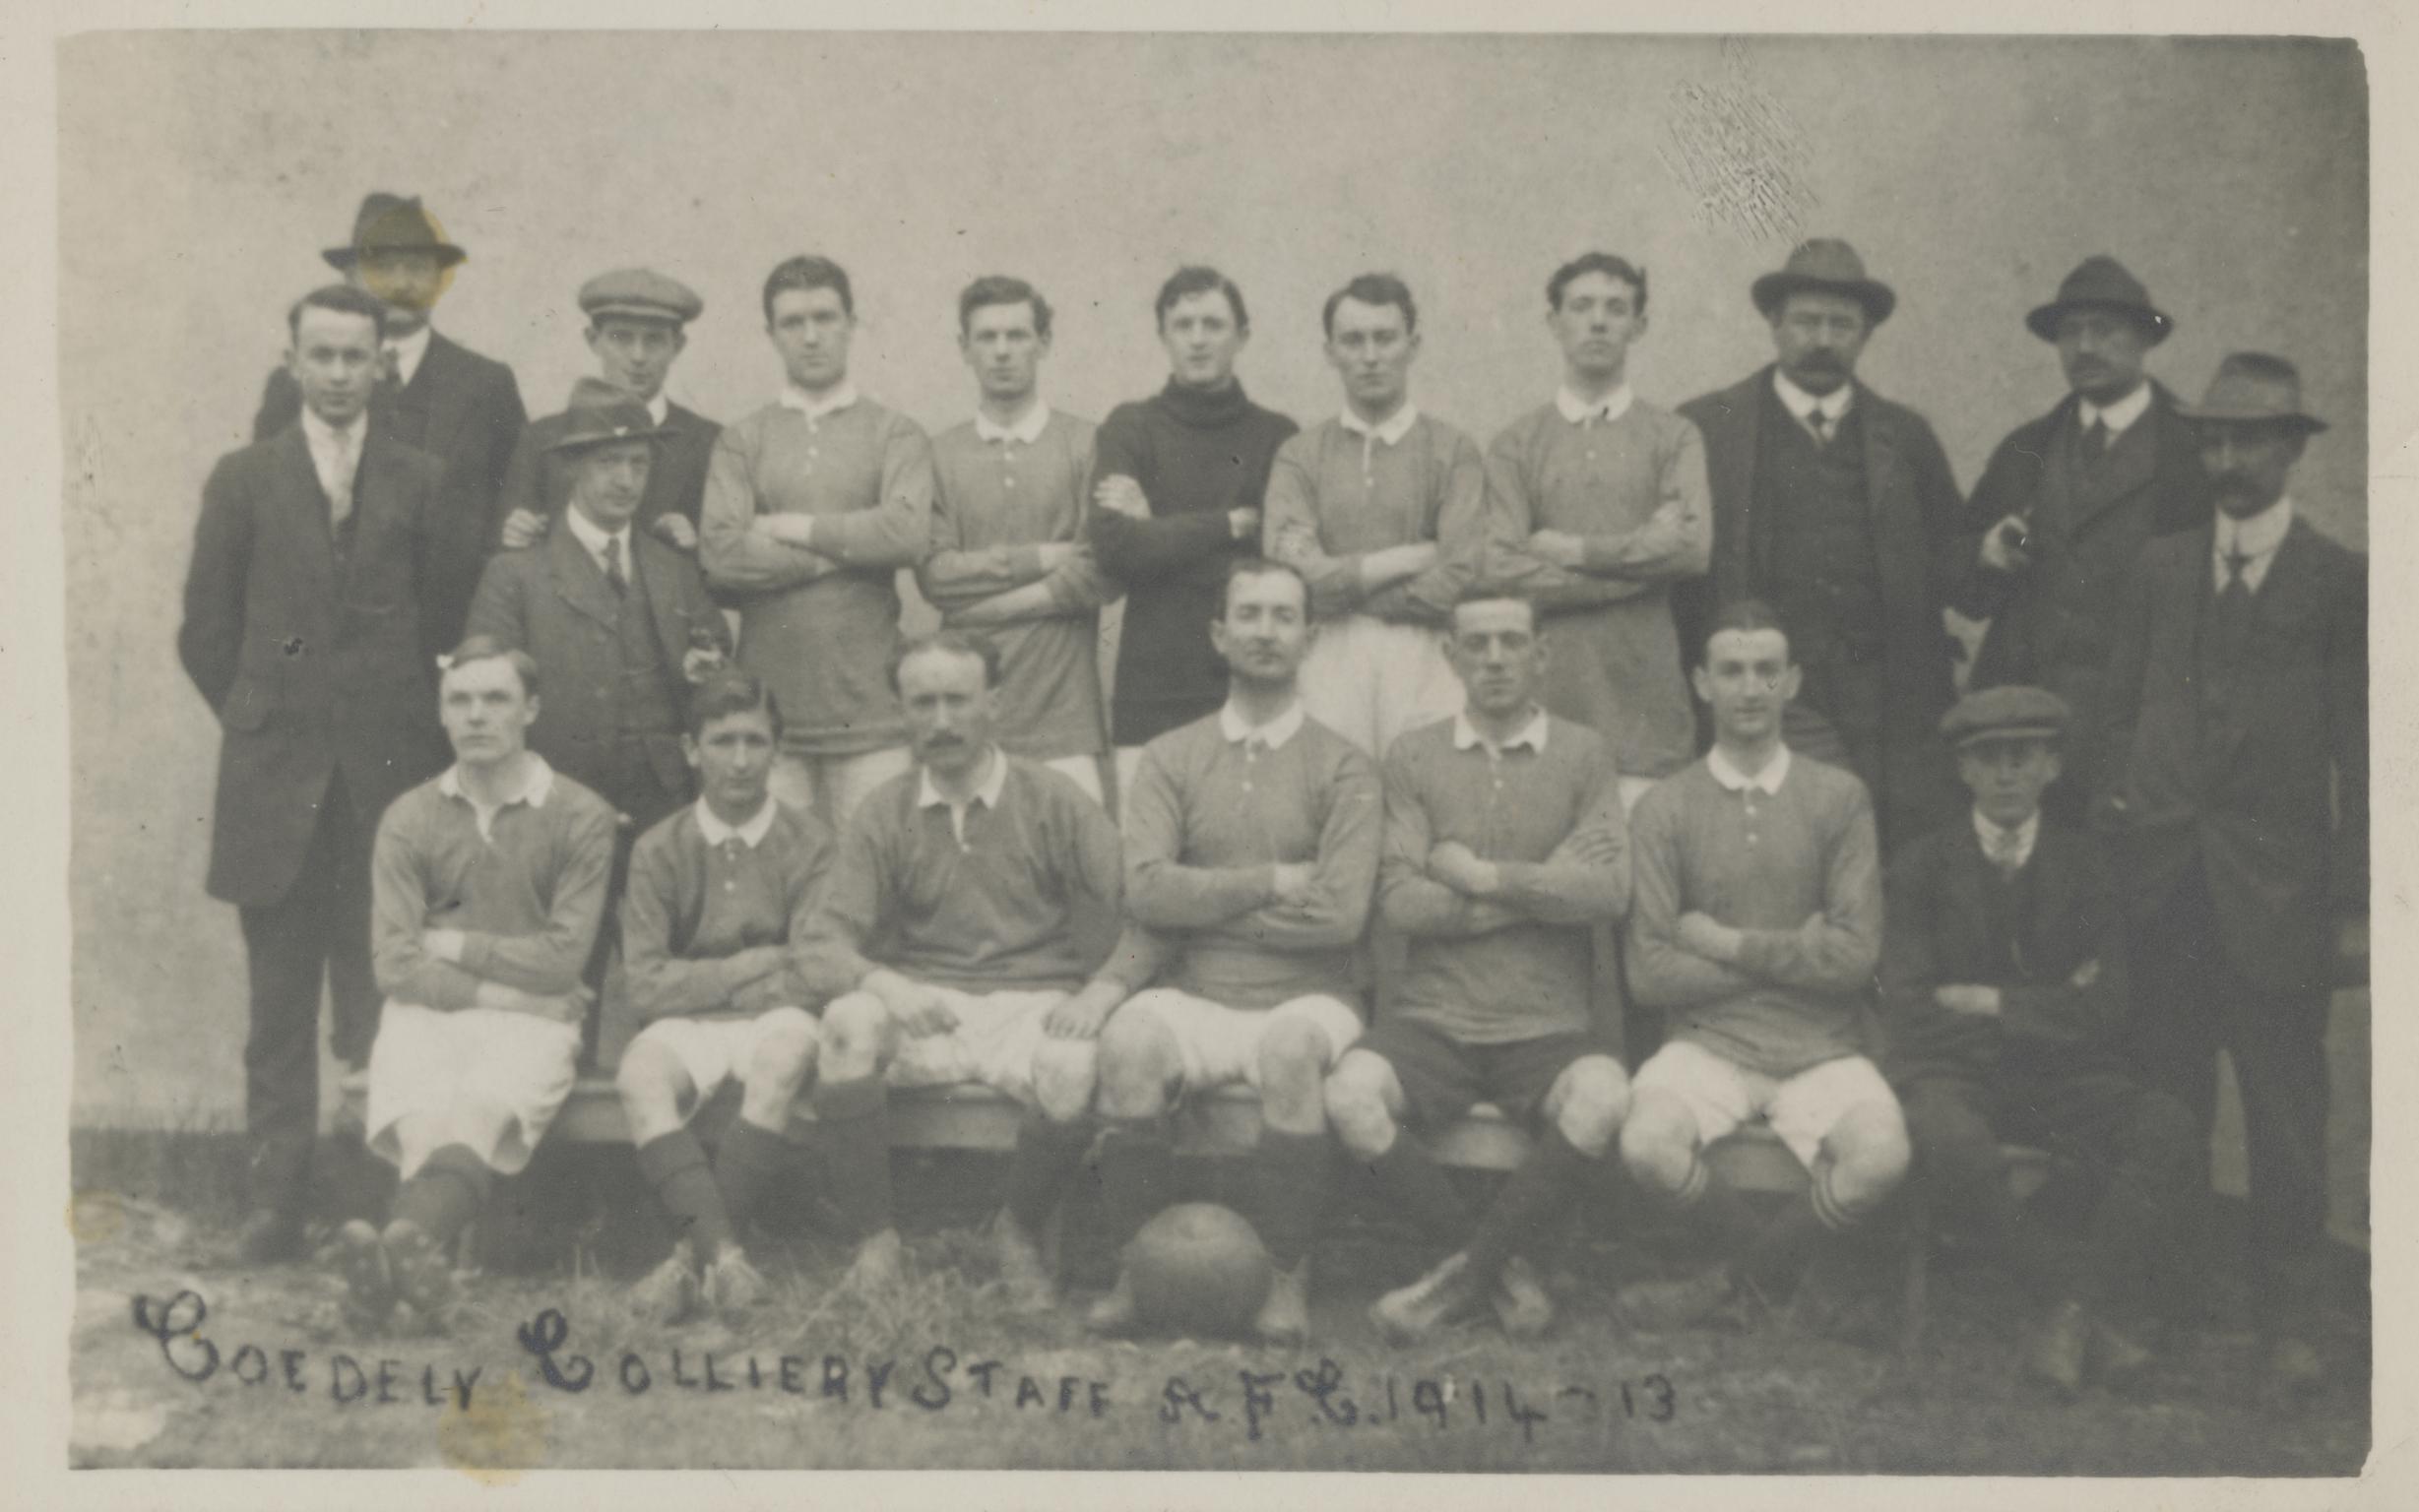 Coedely Colliery Staff A.F.C. 1914-13 (photograph)